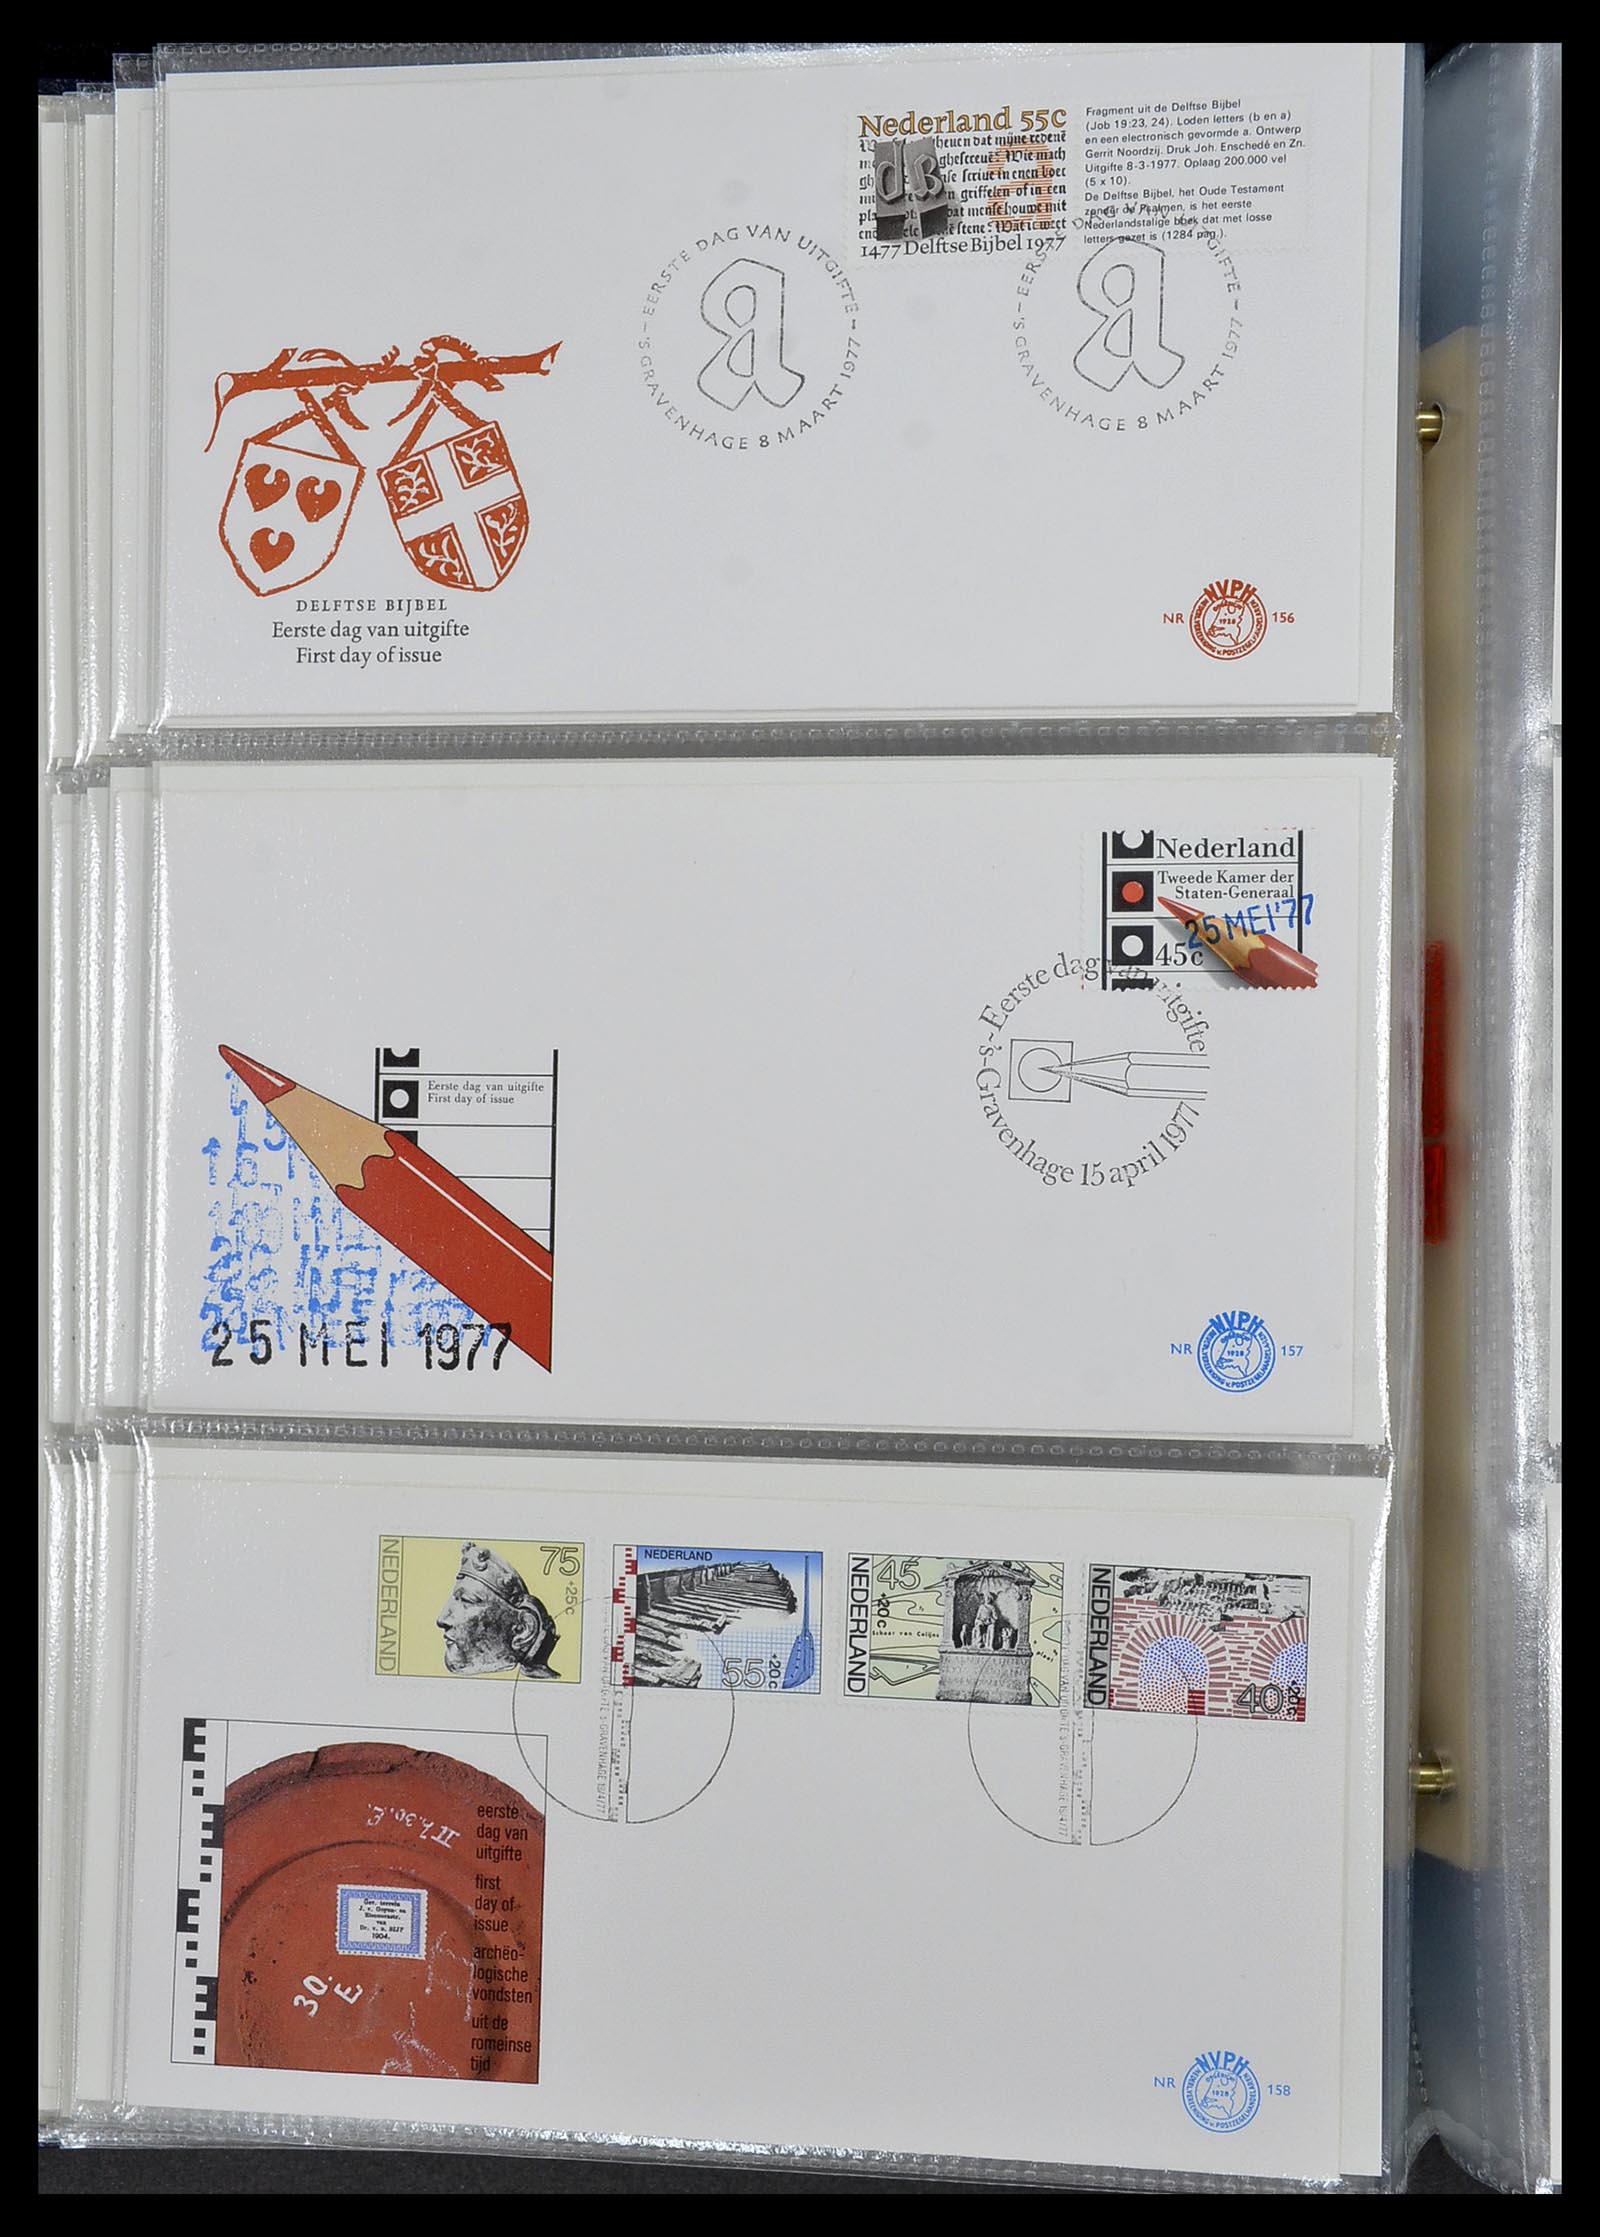 34207 020 - Stamp collection 34207 Netherlands FDC's 1970-2011.